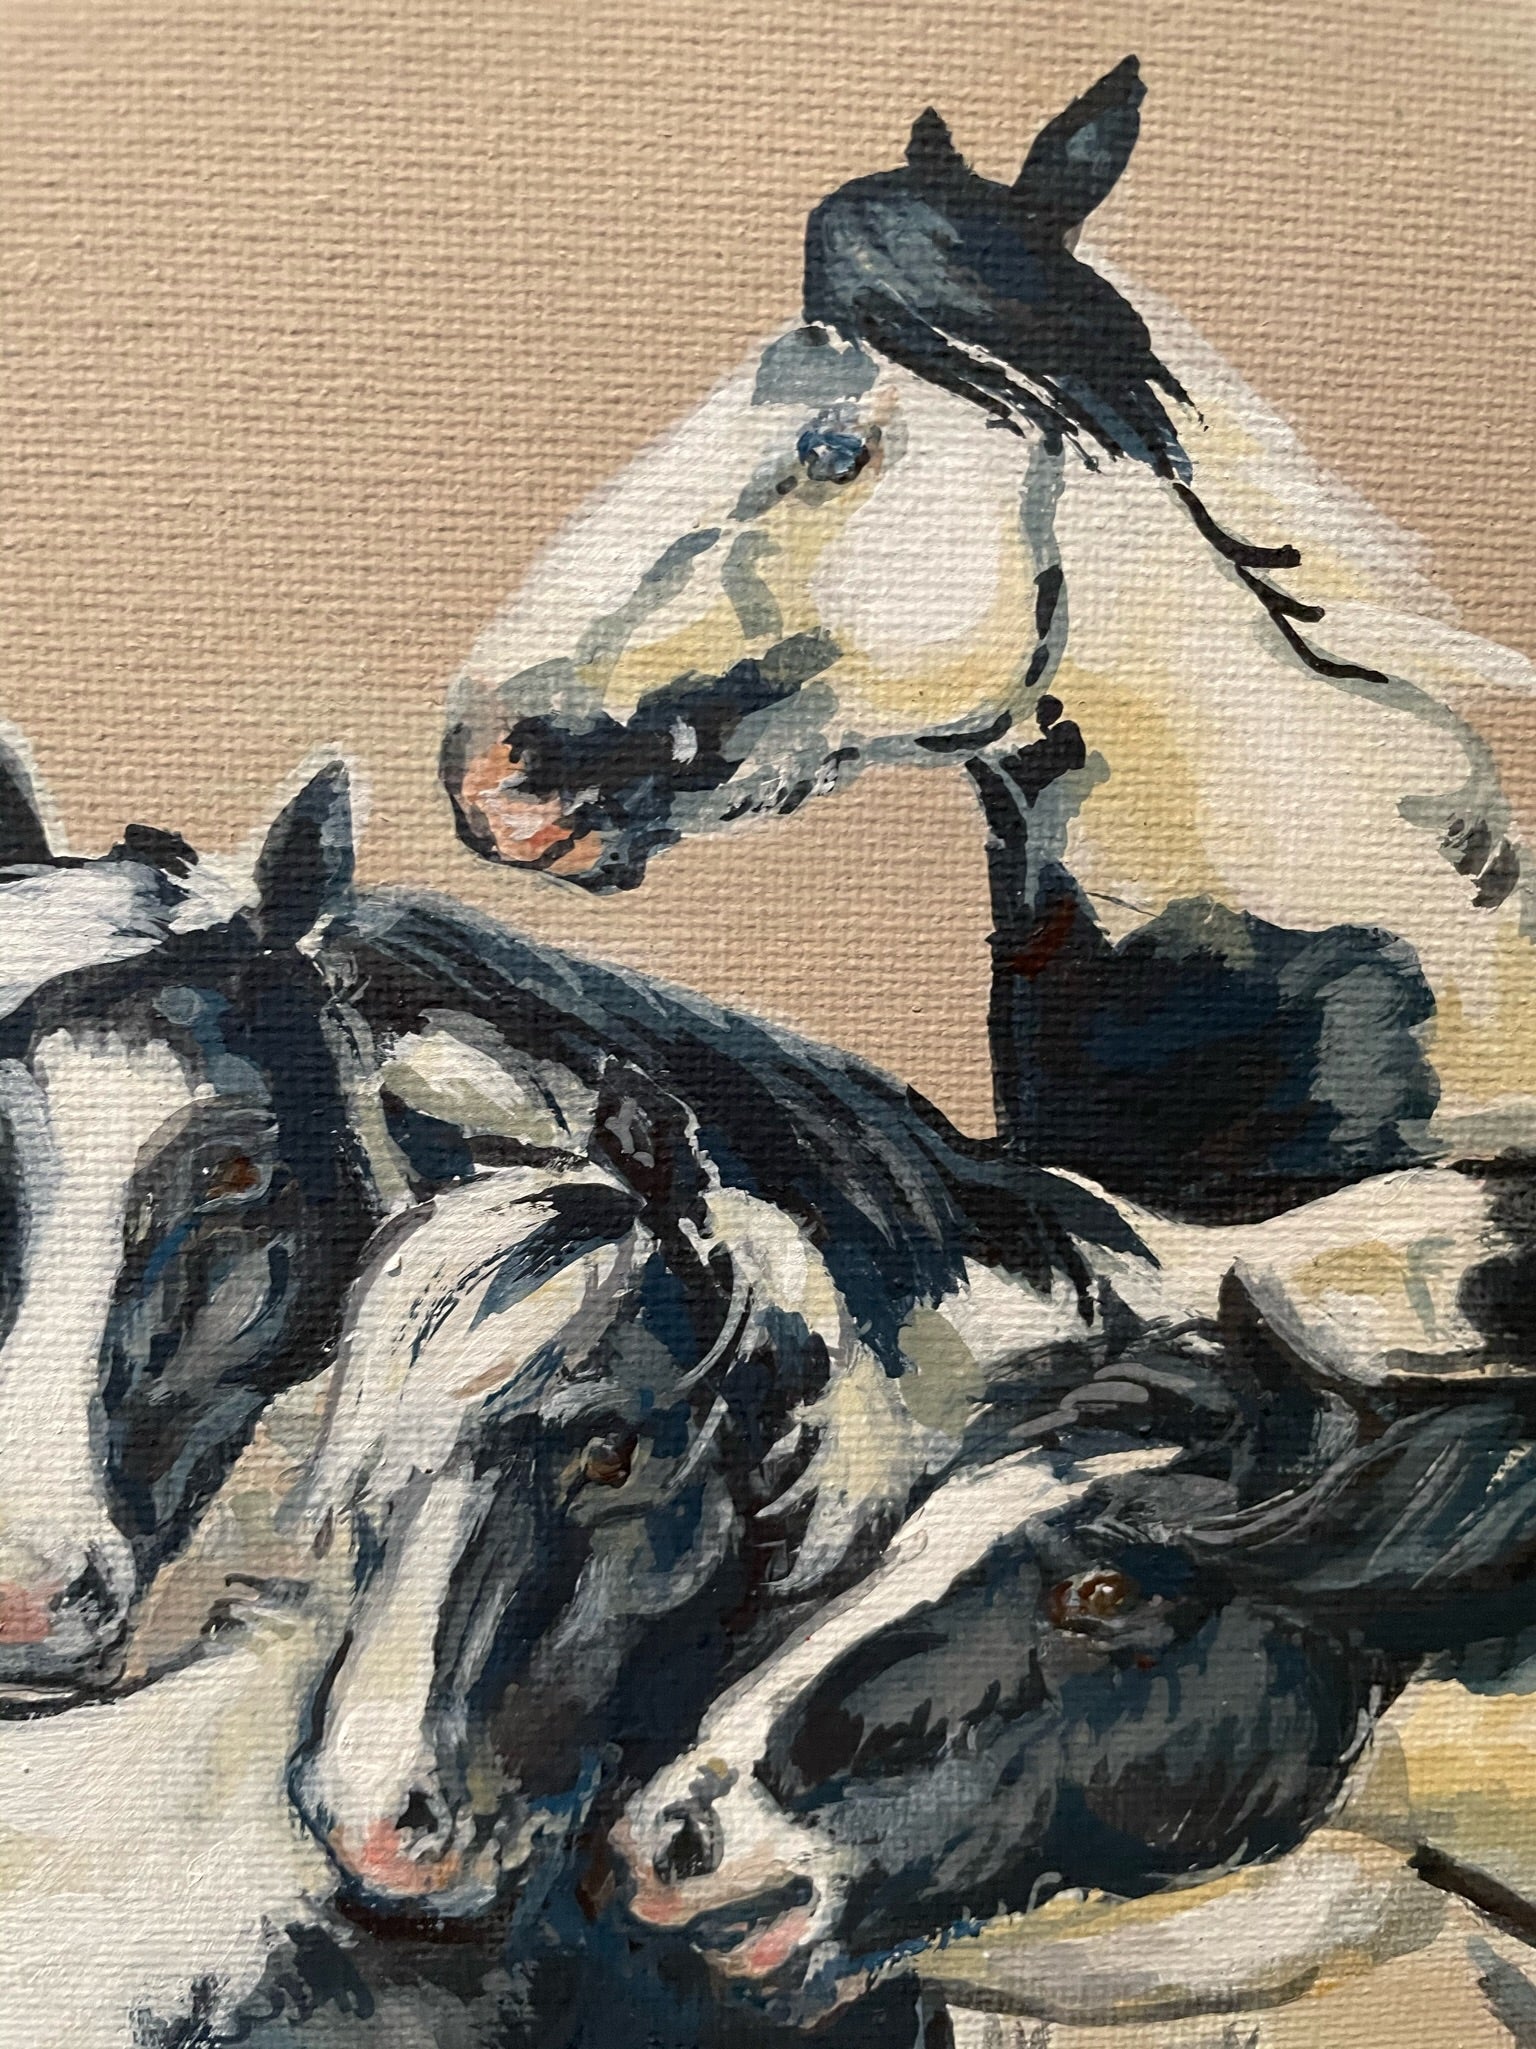 Piebald Ponies - A framed painting of black and white horses